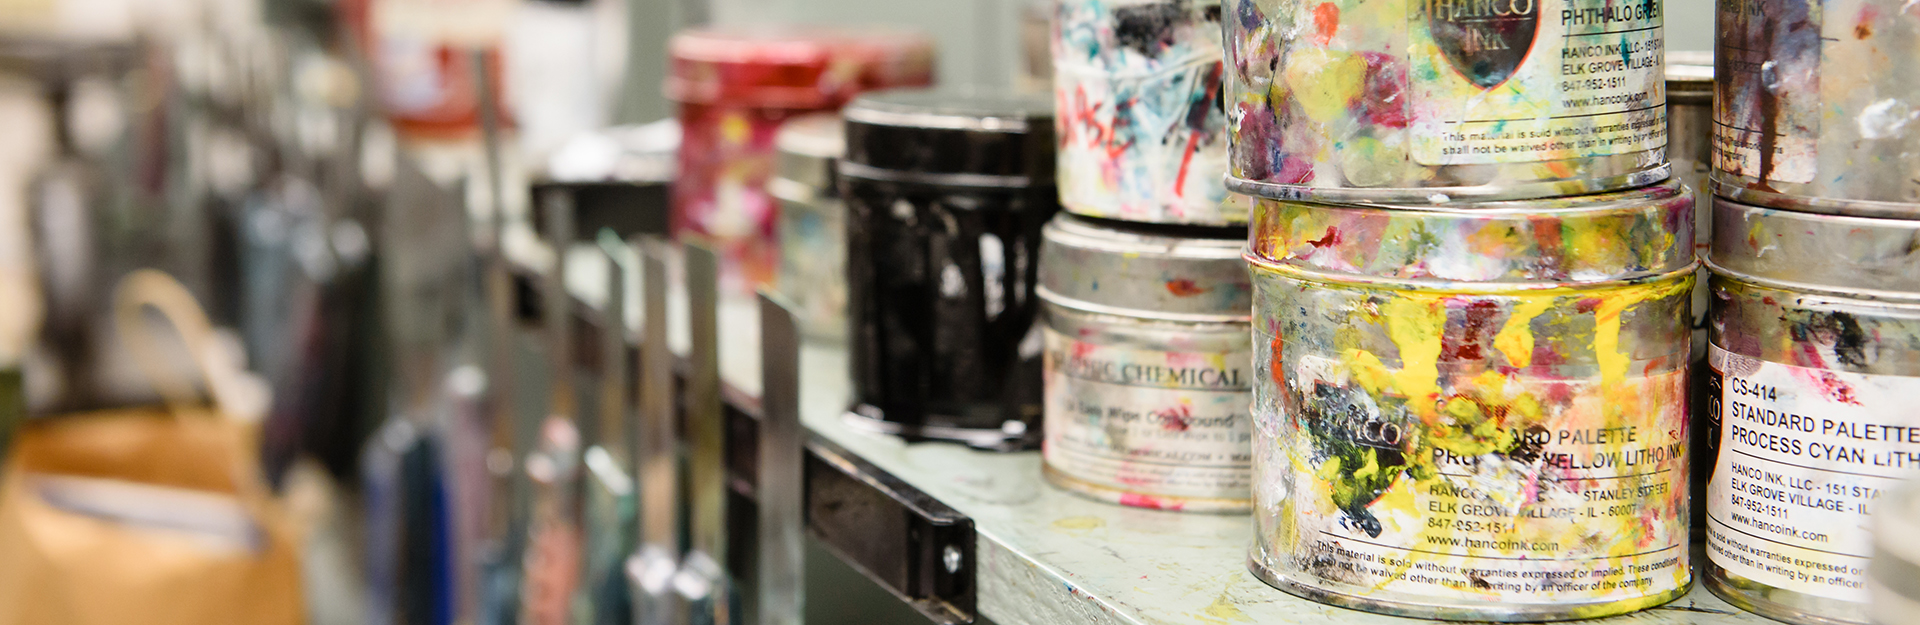 Image of paint cans on a shelf